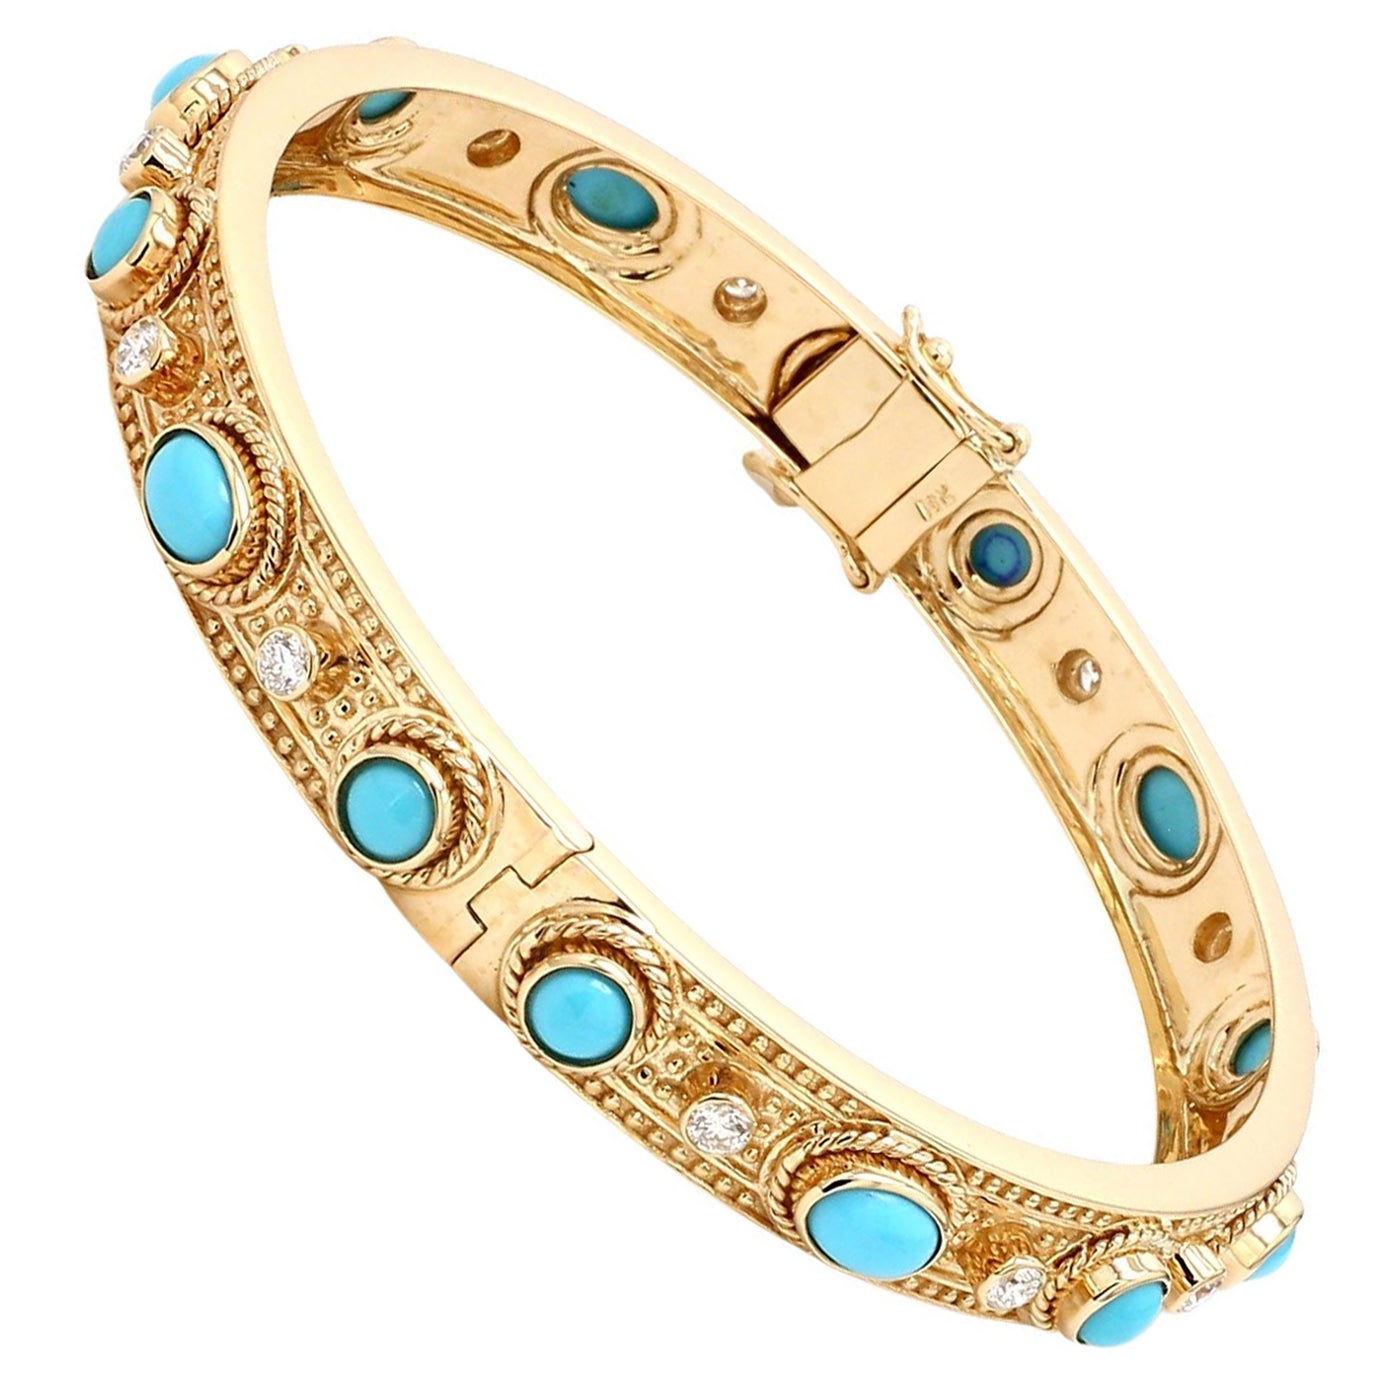 Real Oval Turquoise Gemstone Bracelet Diamond Solid 14k Yellow Gold Fine Jewelry For Sale